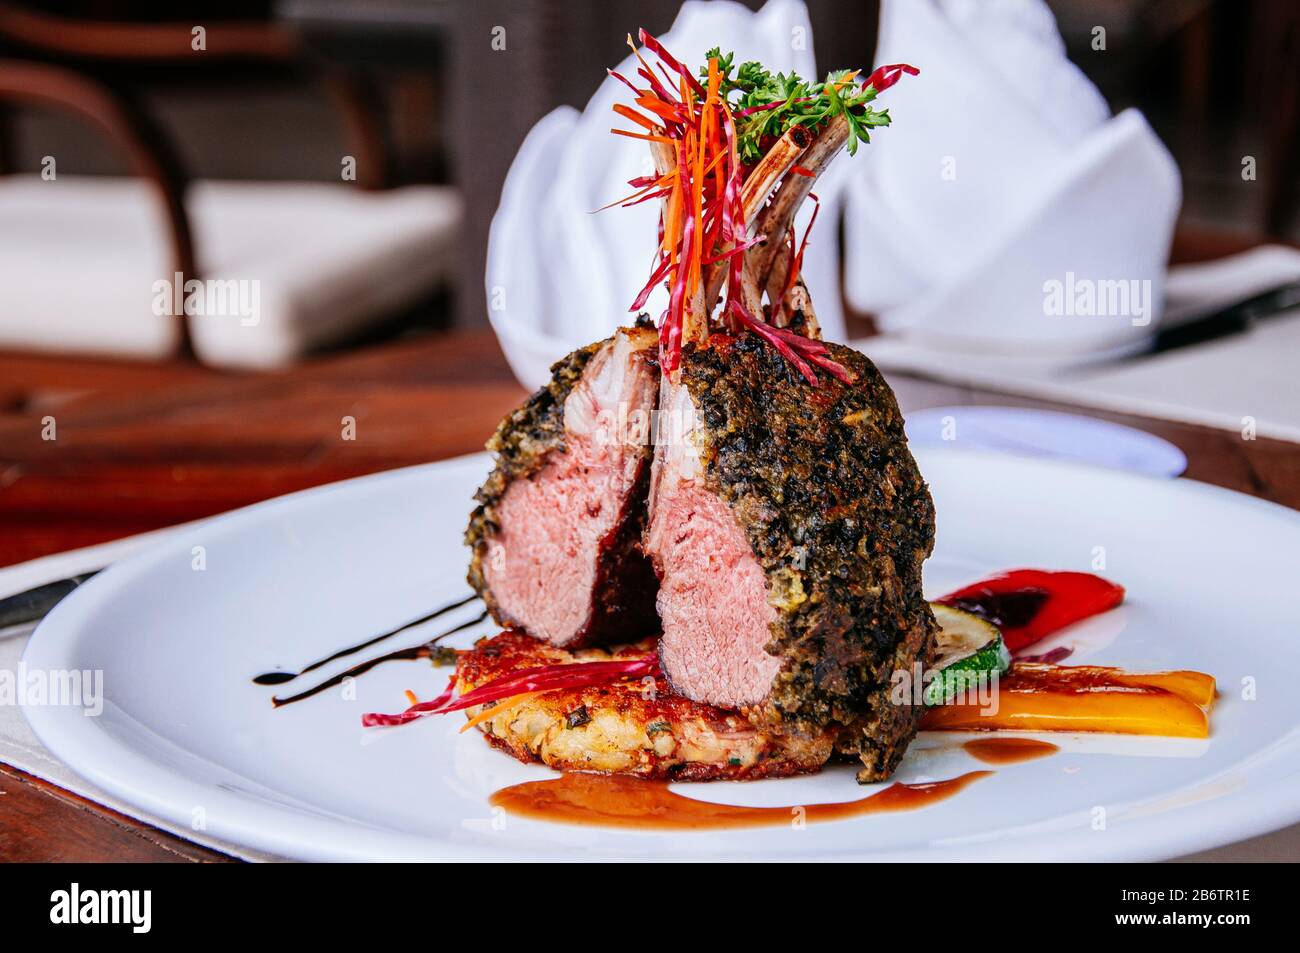 Roasted Lamb chop steak with crispy herb crust and grilled vegetables on white plate at dinner table Stock Photo